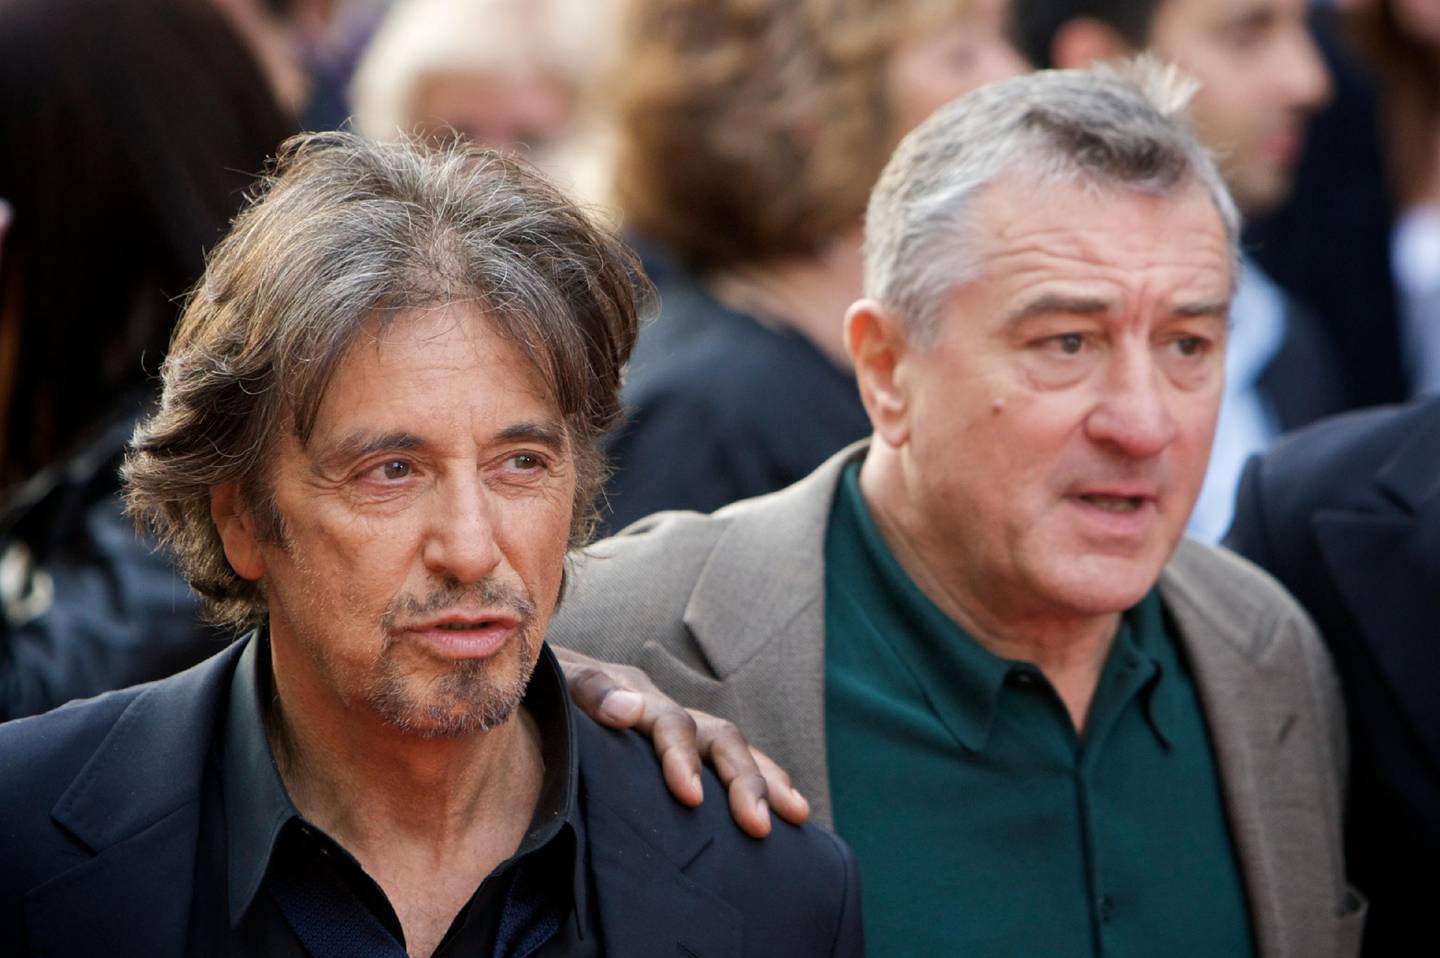 U.S. actors, from left, Al Pacino and Robert De Niro arrive for the British premiere of their latest movie "Righteous Kill", at a cinema in central London Sunday, Sept. 14, 2008. (AP Photo/Edmond Terakopian)